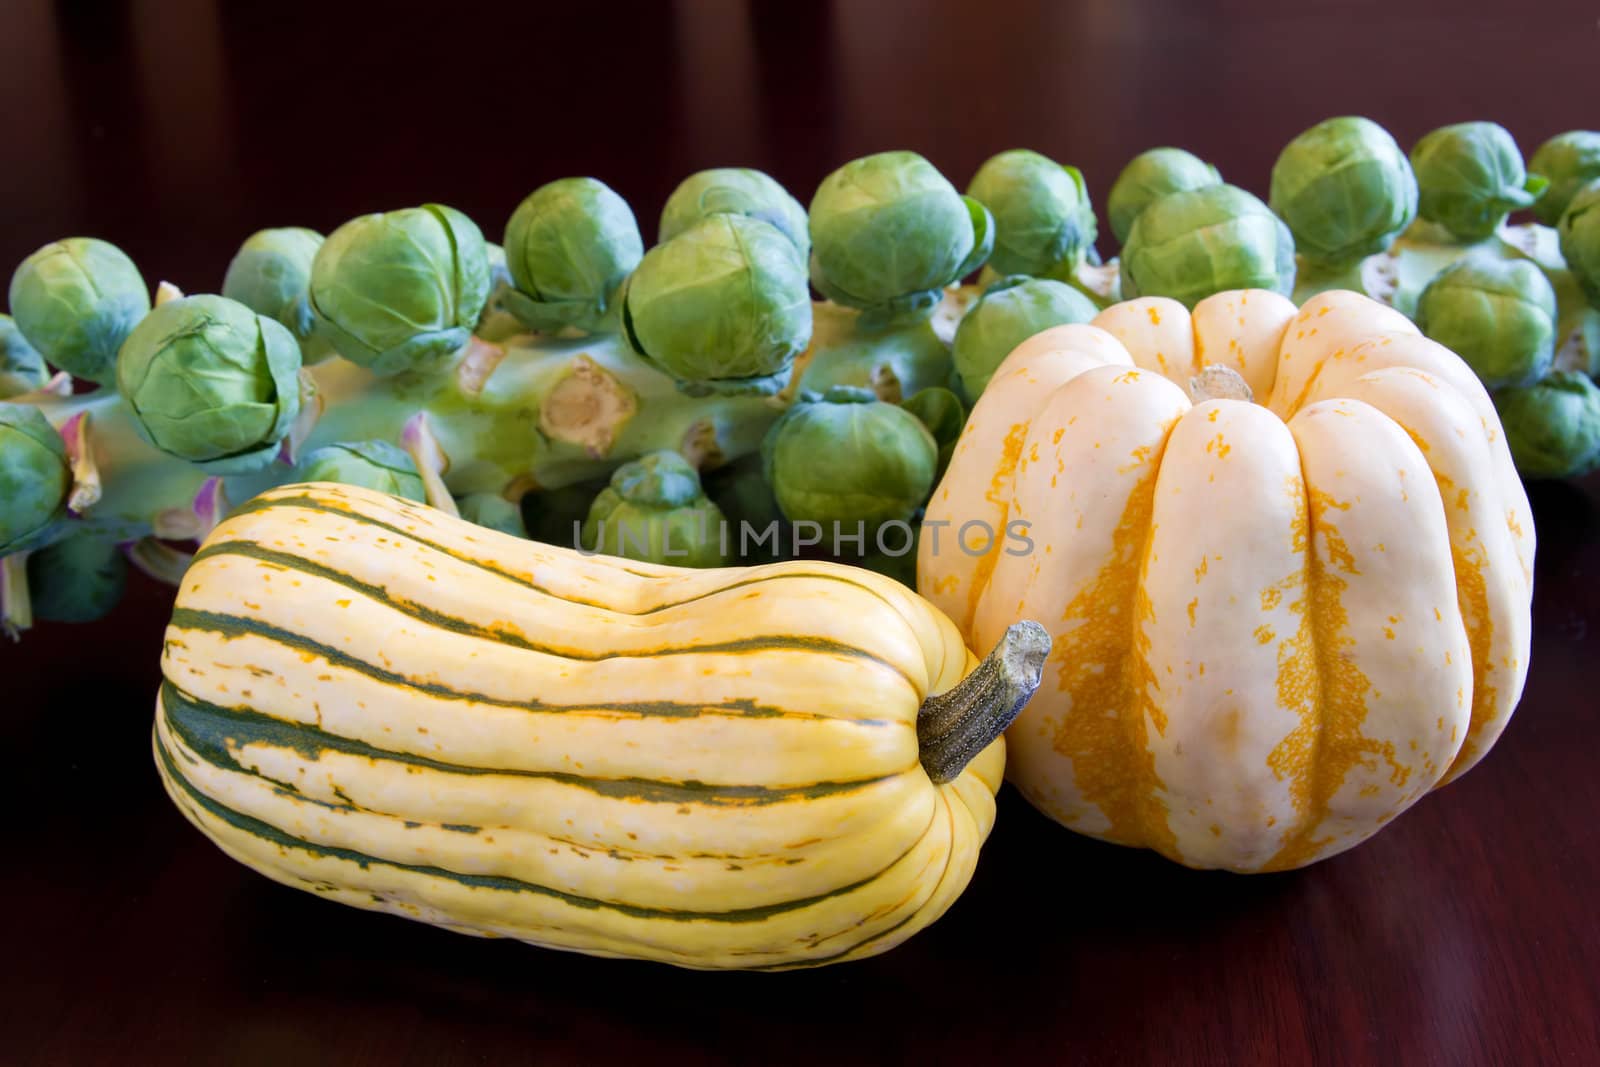 Brussels Sprouts with Sweet Dumpling and Delicata Squash Still Life